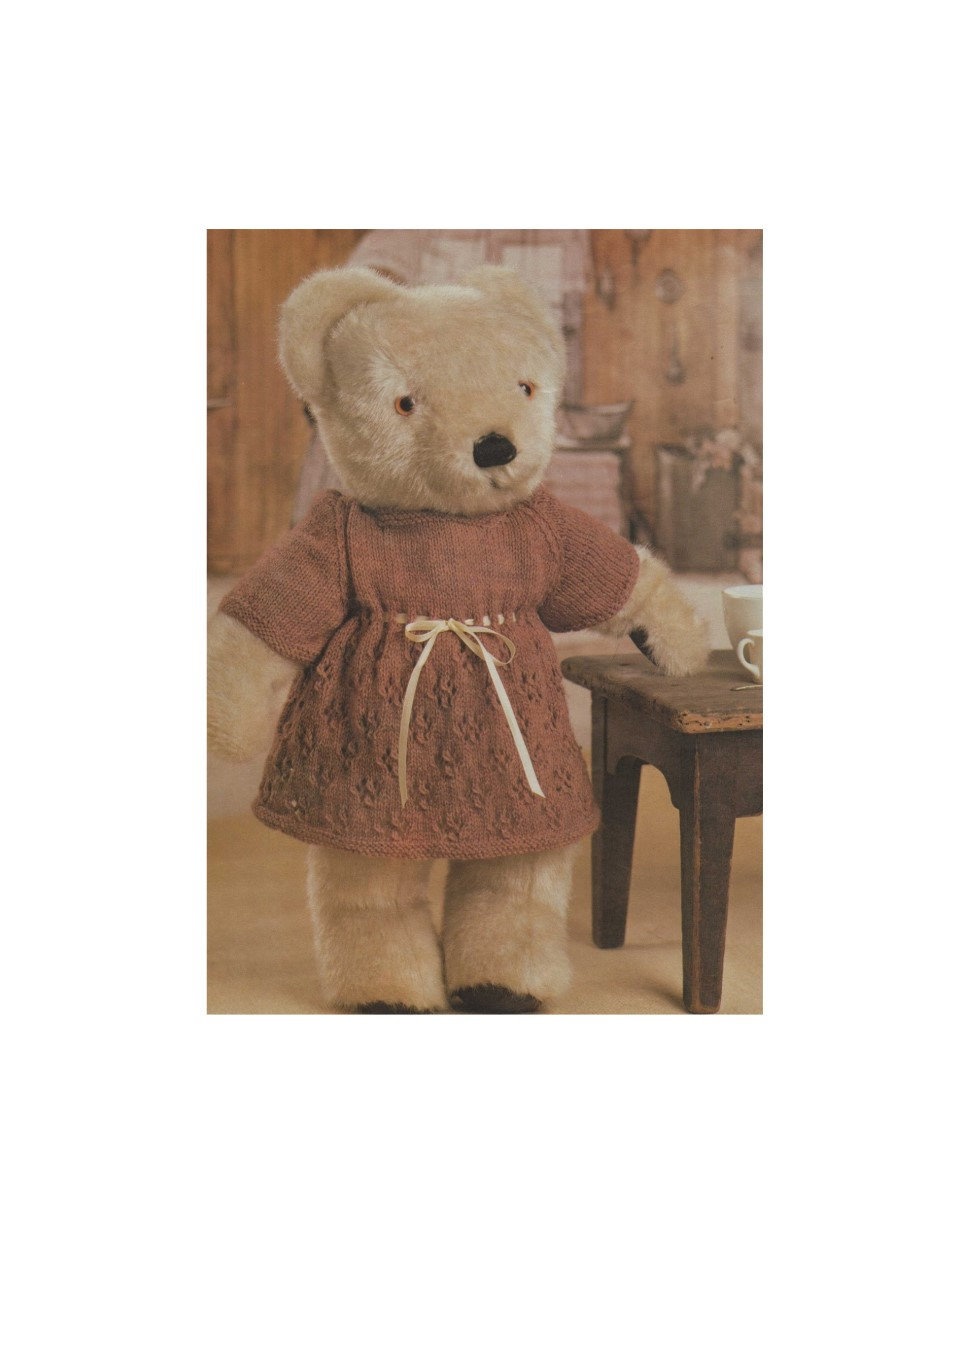 Knitting Patterns For Teddy Bear Clothes Teddy Bears Dress Knitting Pattern Pdf Teddy Bear Clothes For 14